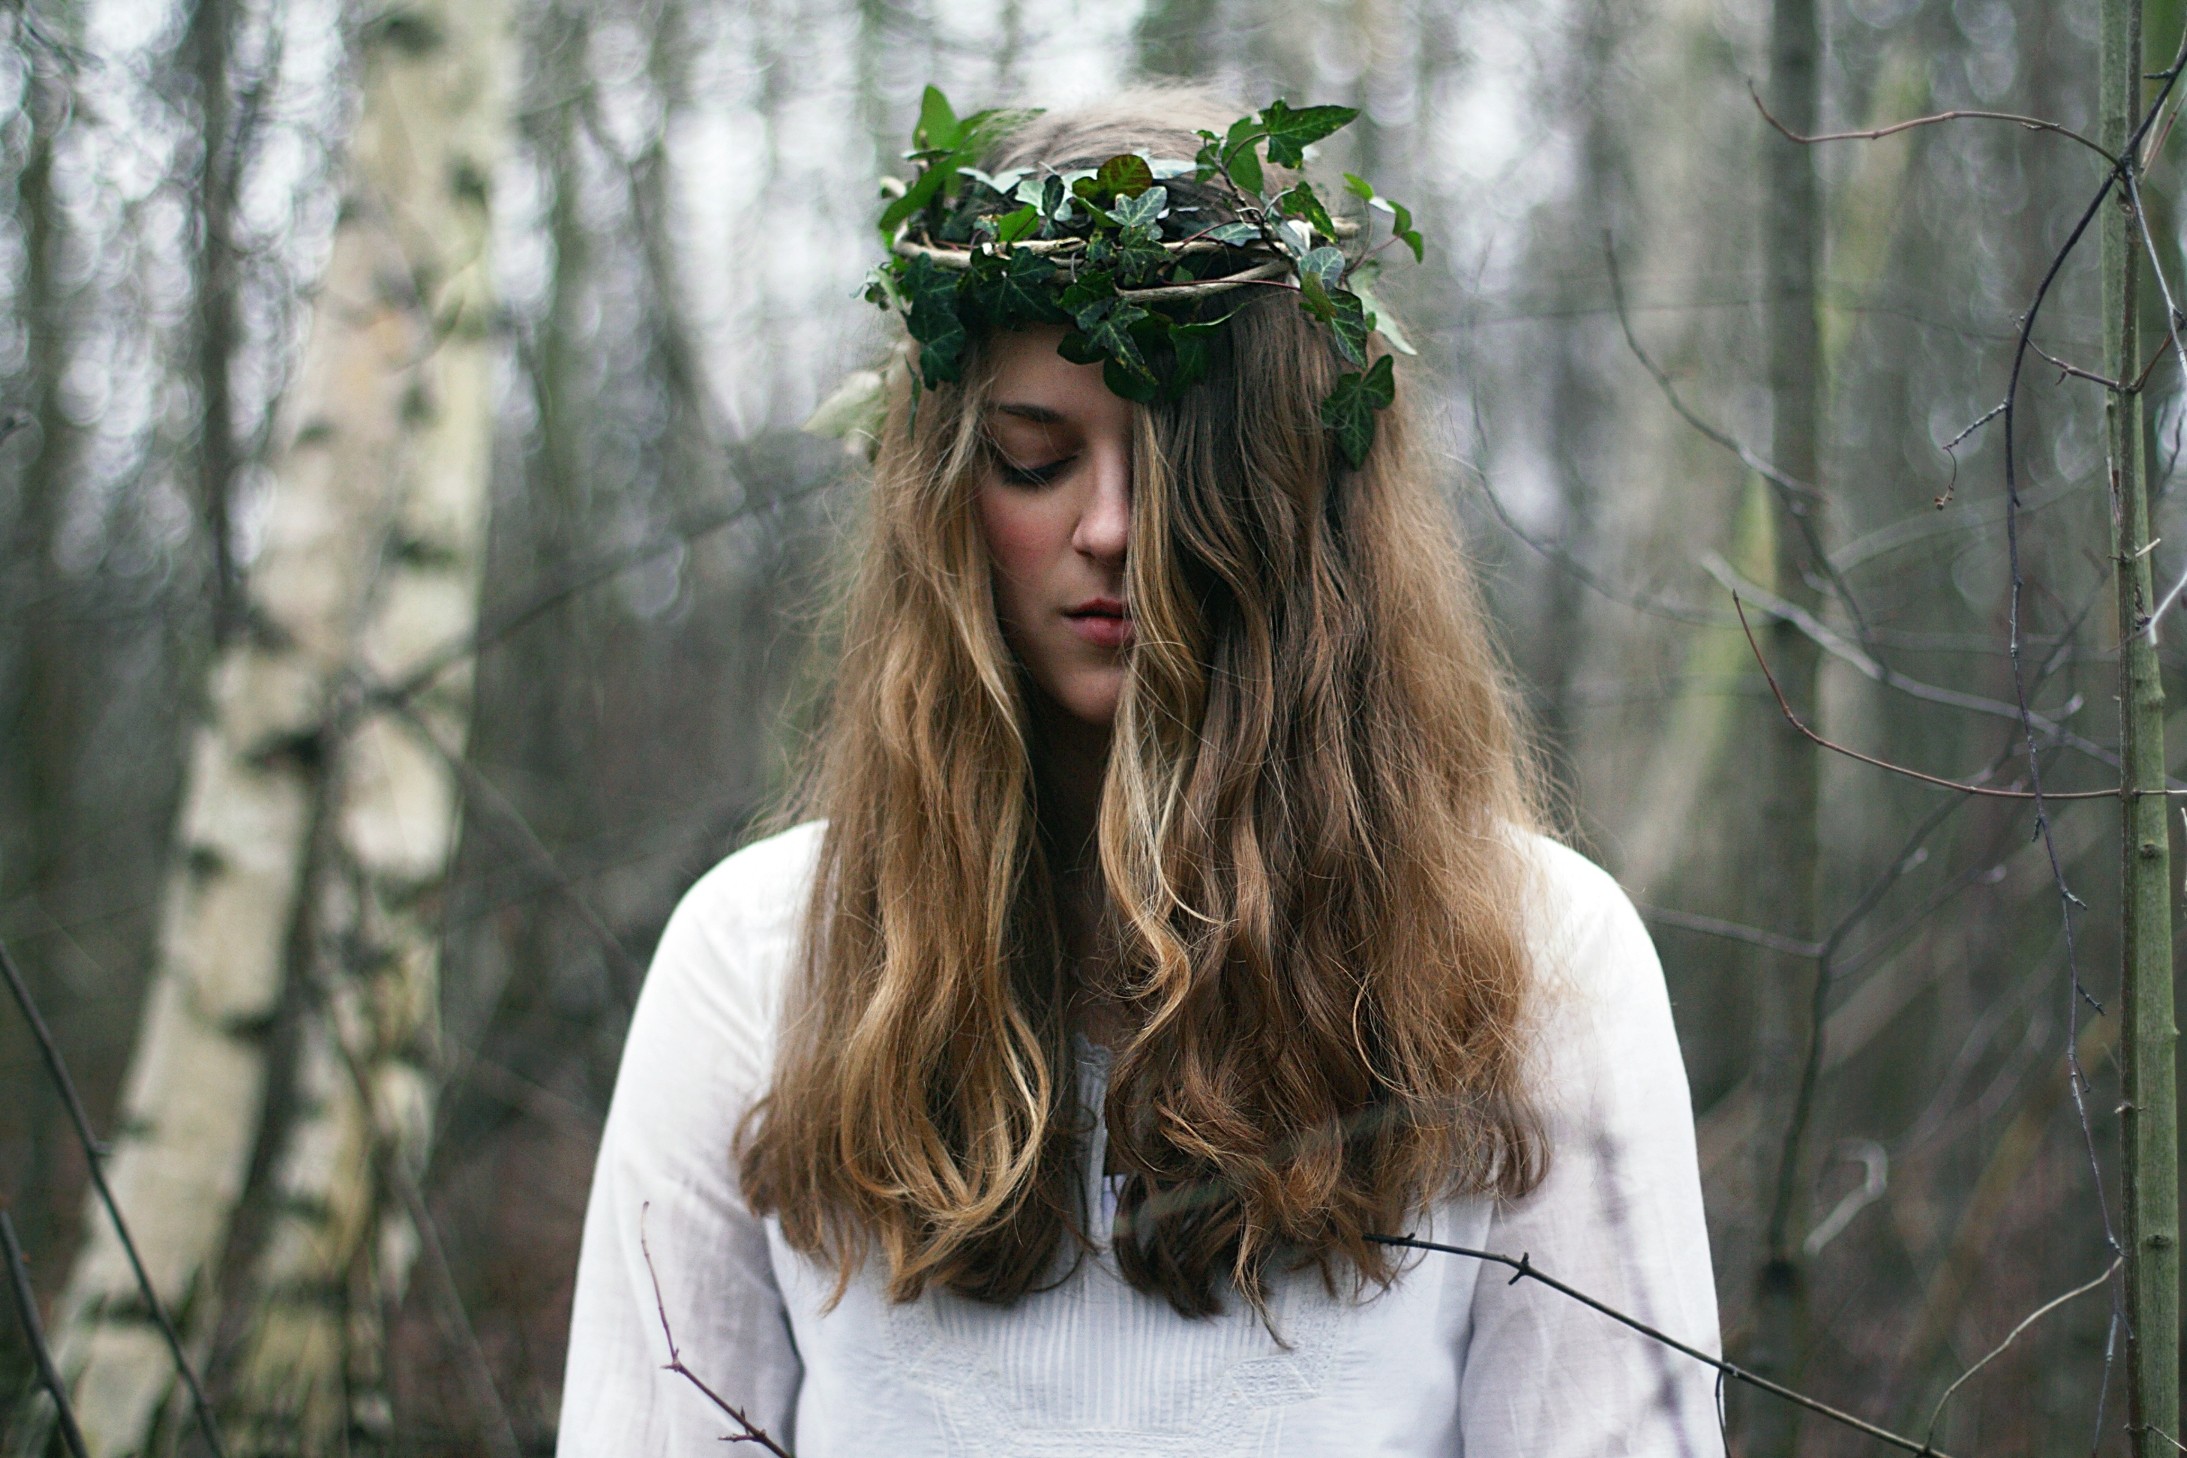 People 2187x1458 women model women outdoors plants flower crown long hair hair over one eye nature trees white clothing face